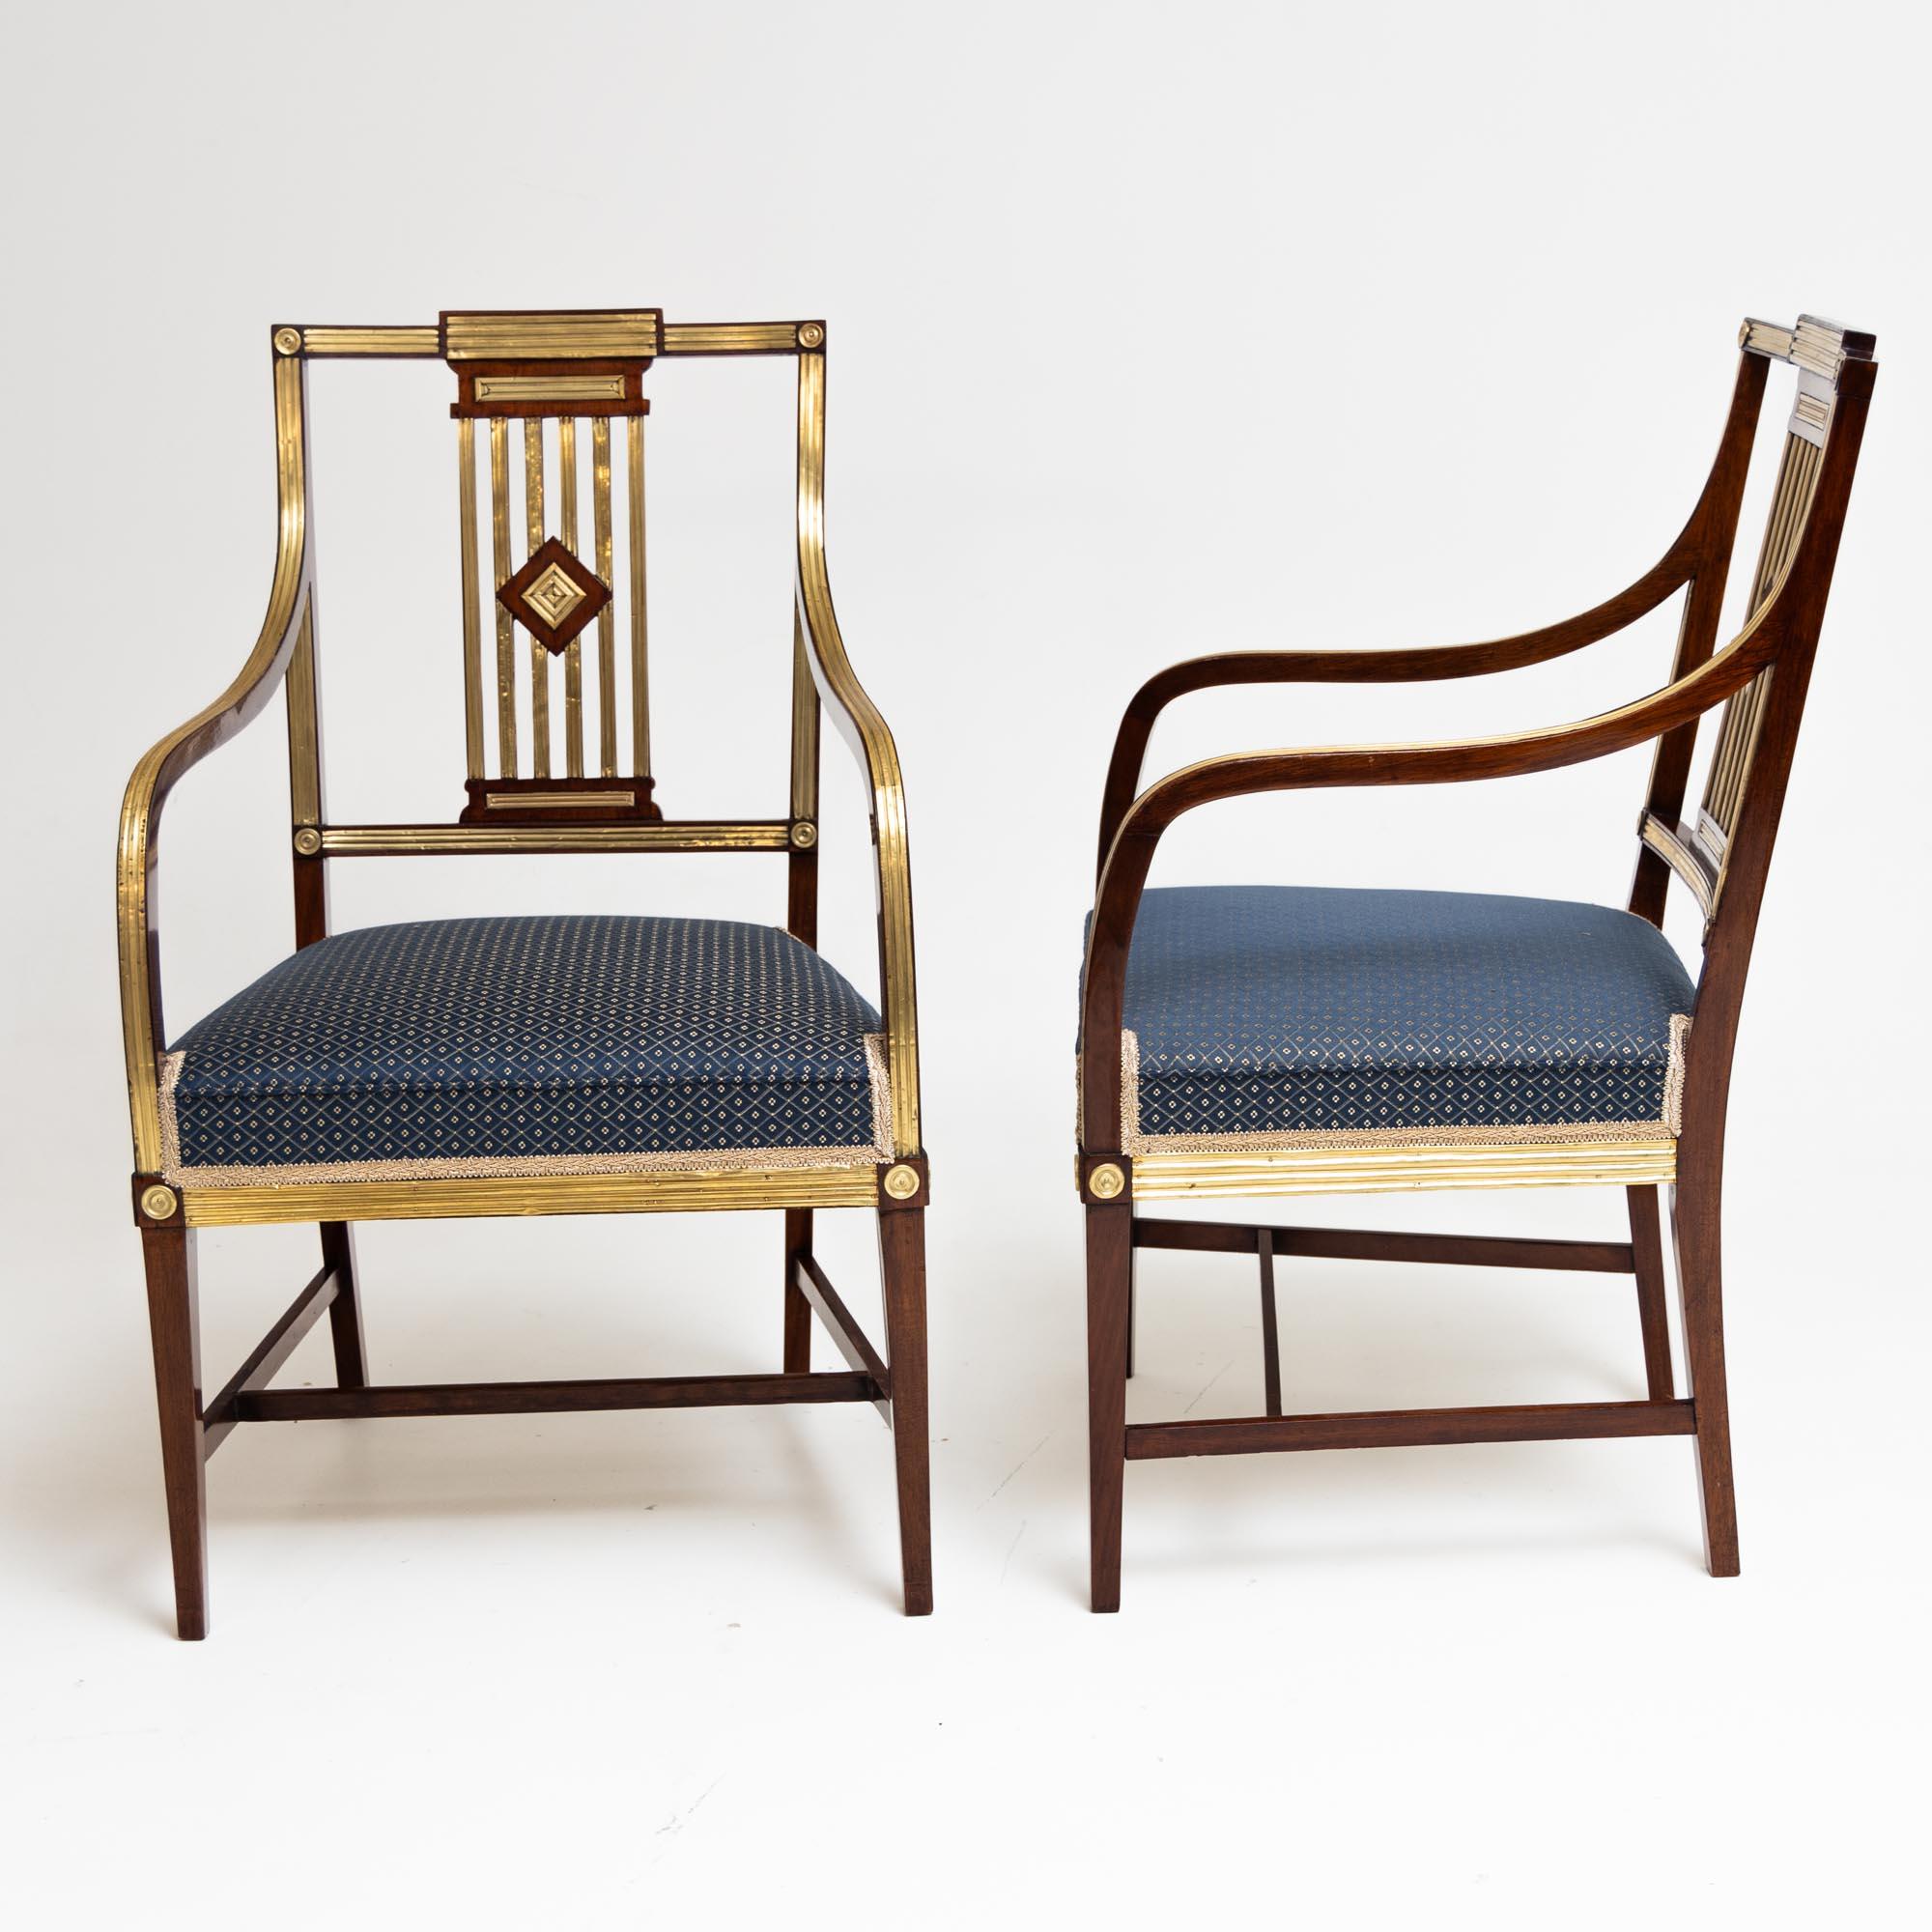 Pair of Neoclassical Dining Room Chairs, Brass, Baltic States, Late 18th Century In Good Condition For Sale In Greding, DE